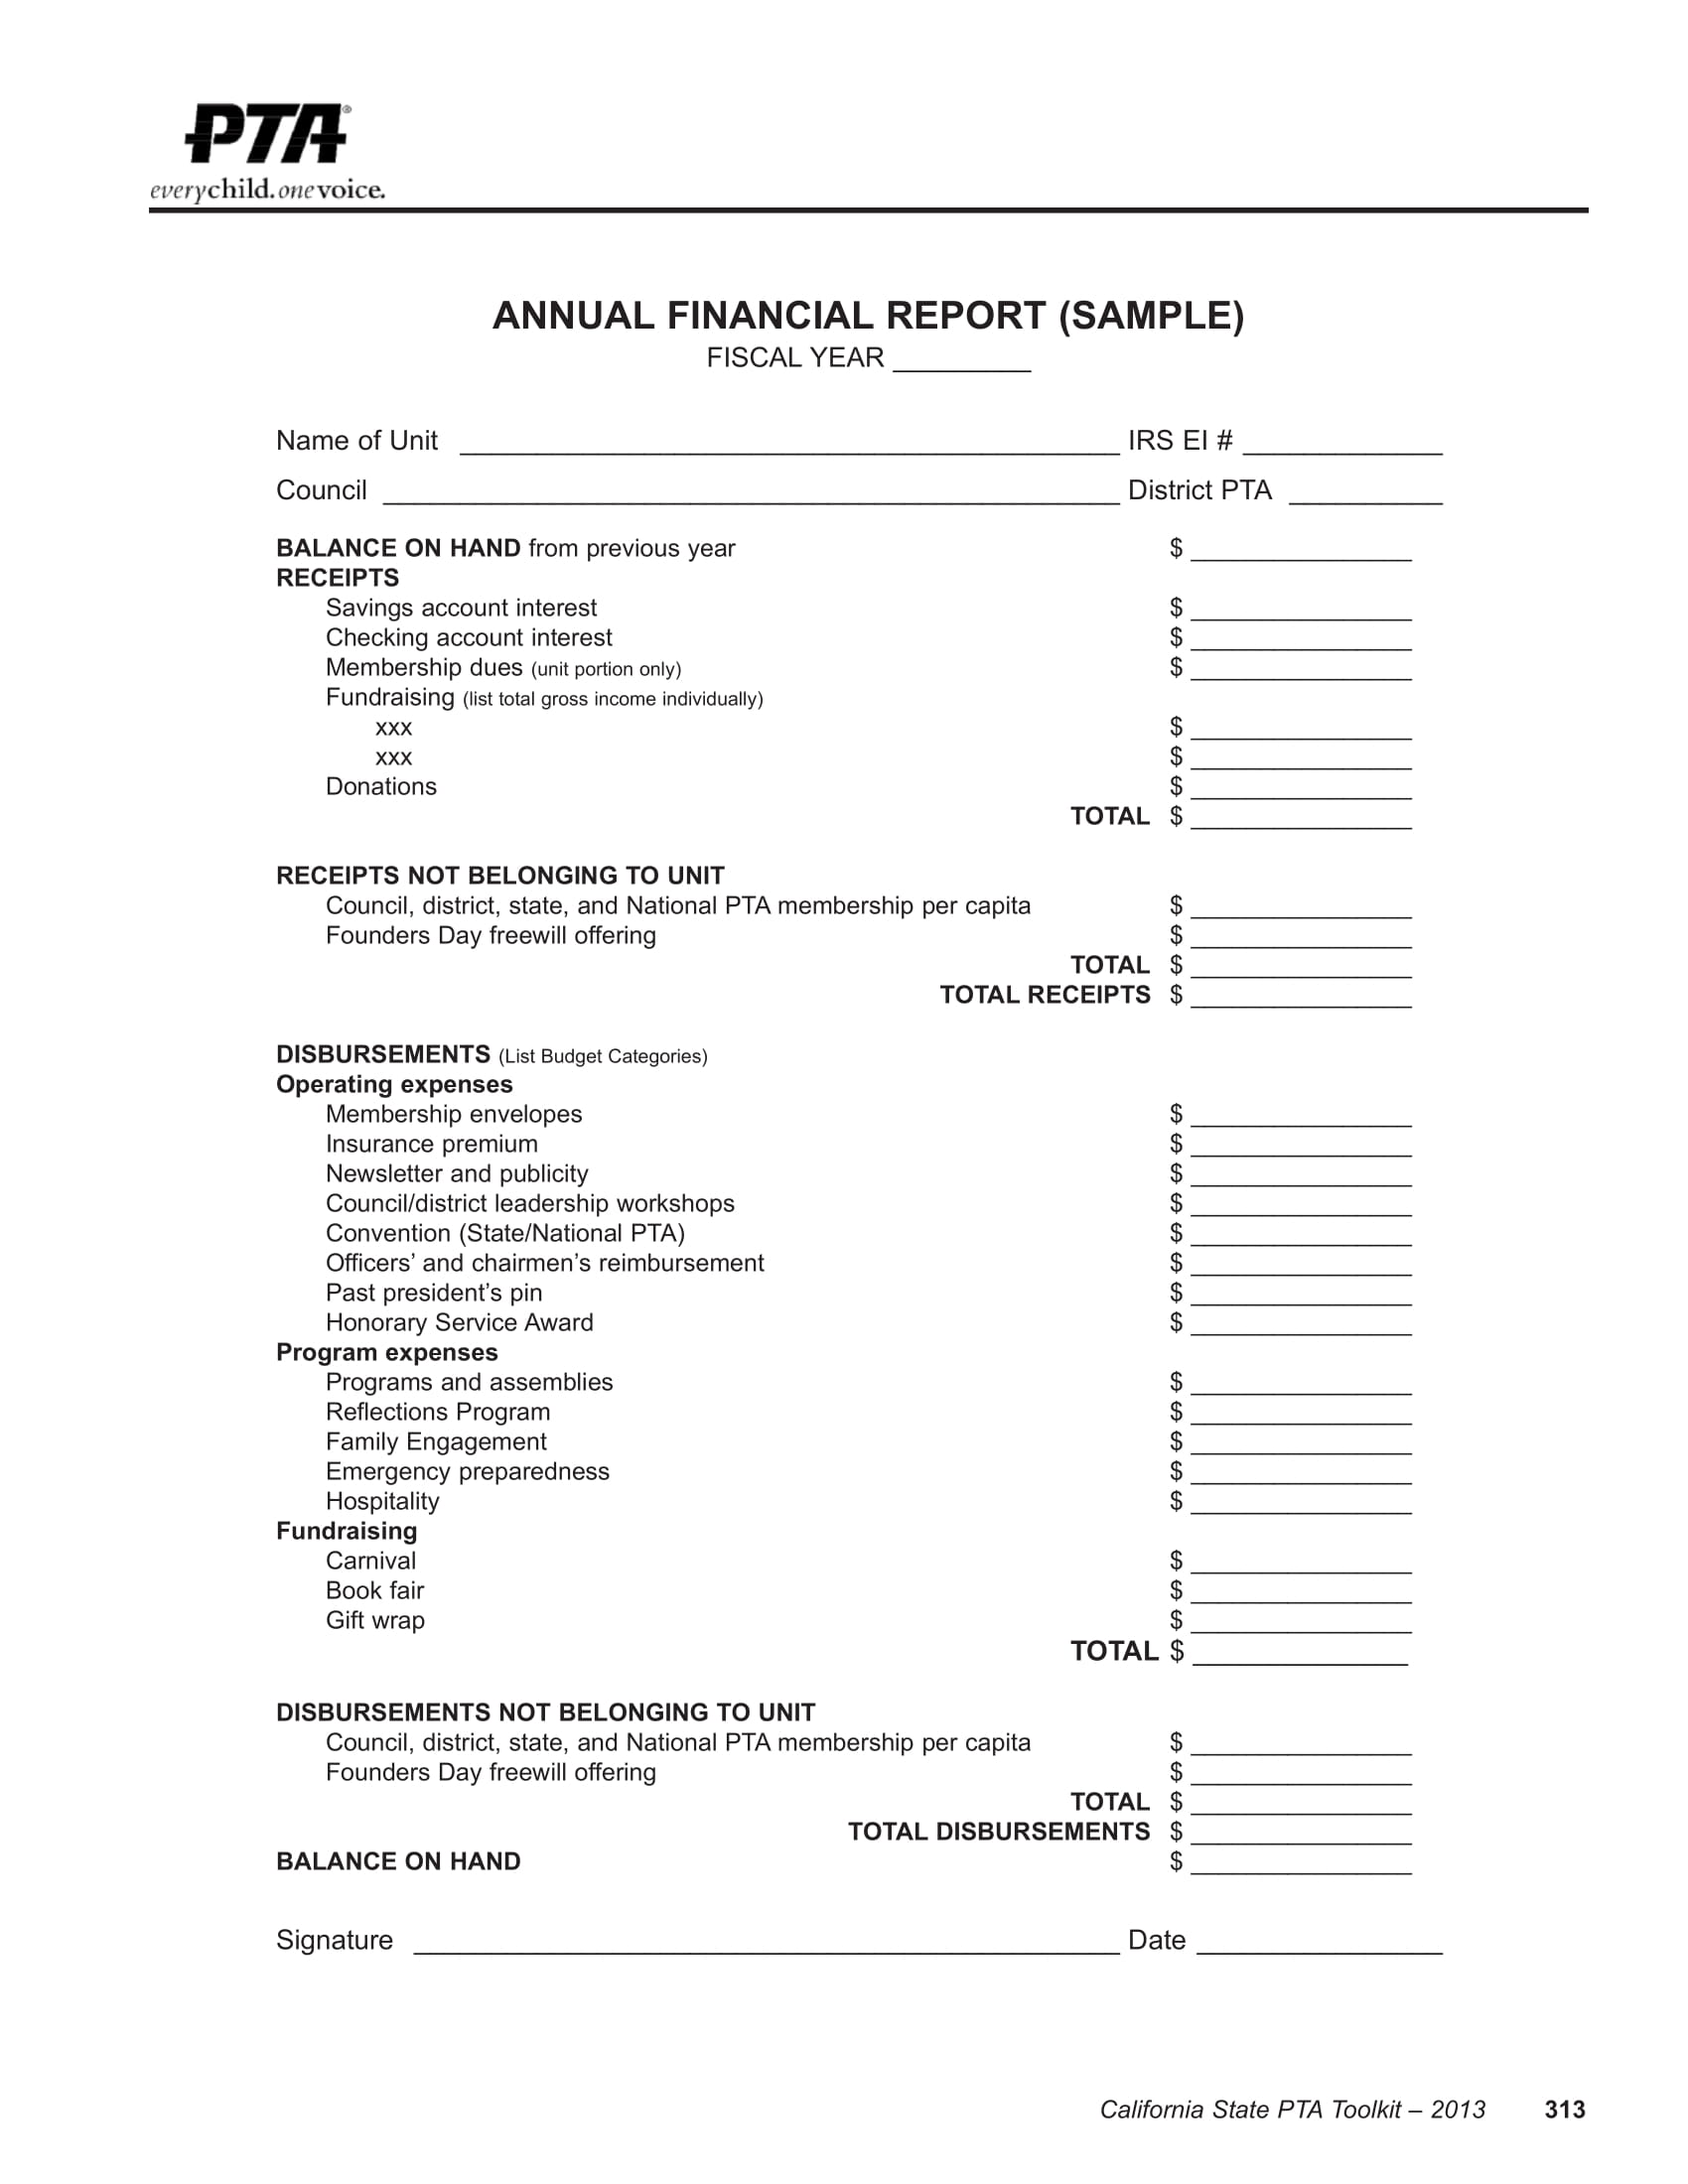 annual financial report example2